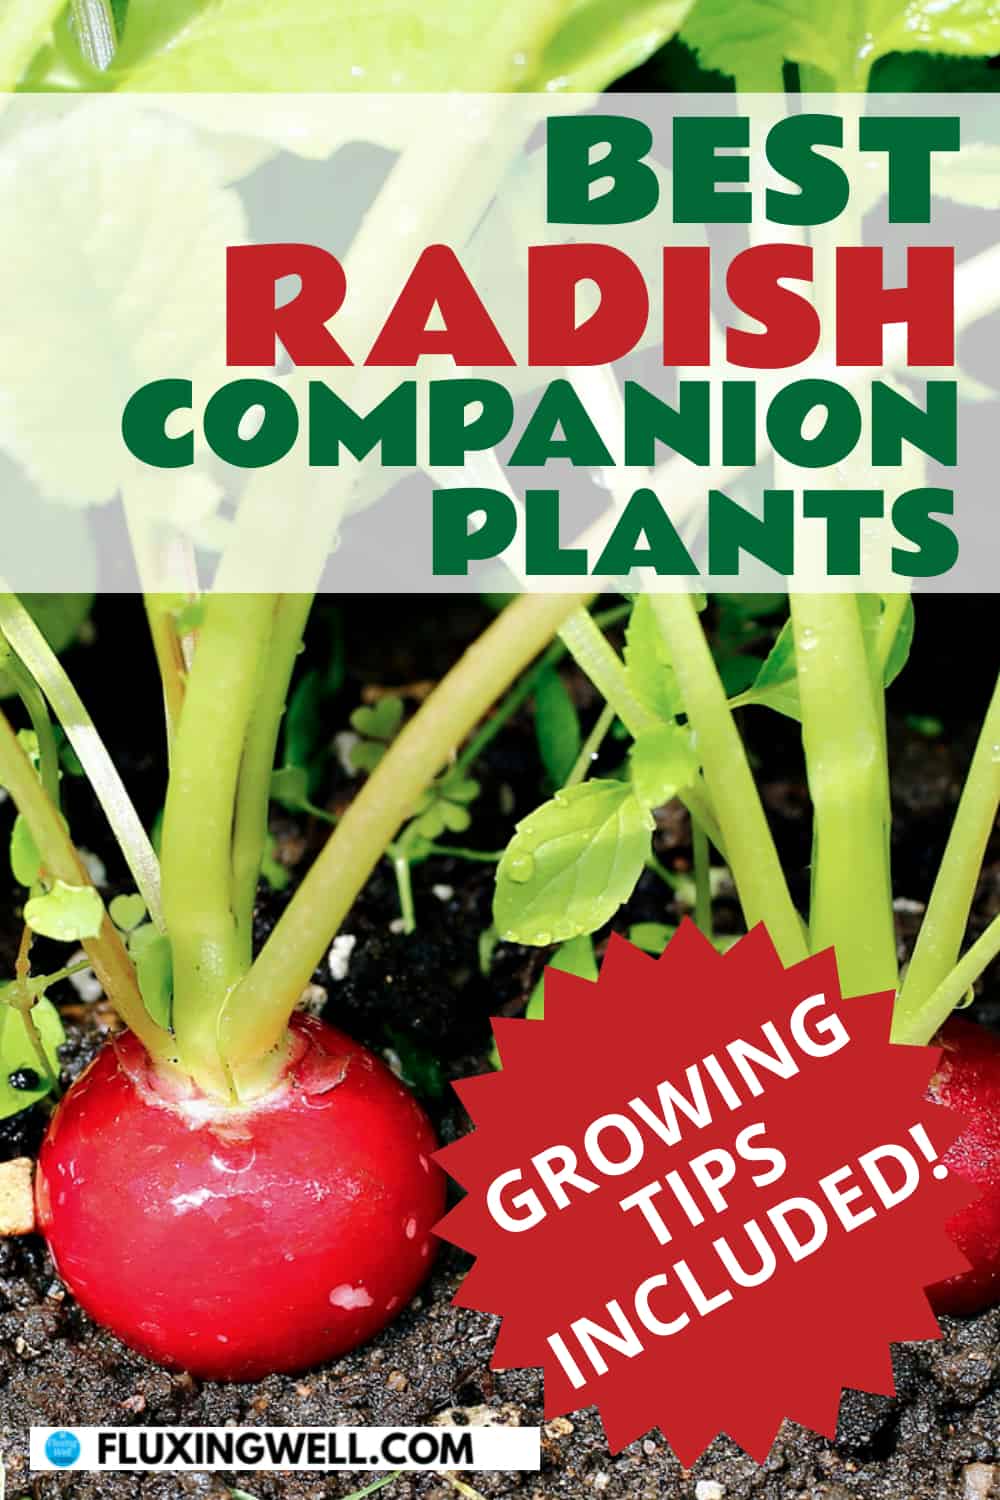 best radish companion plants growing tips included